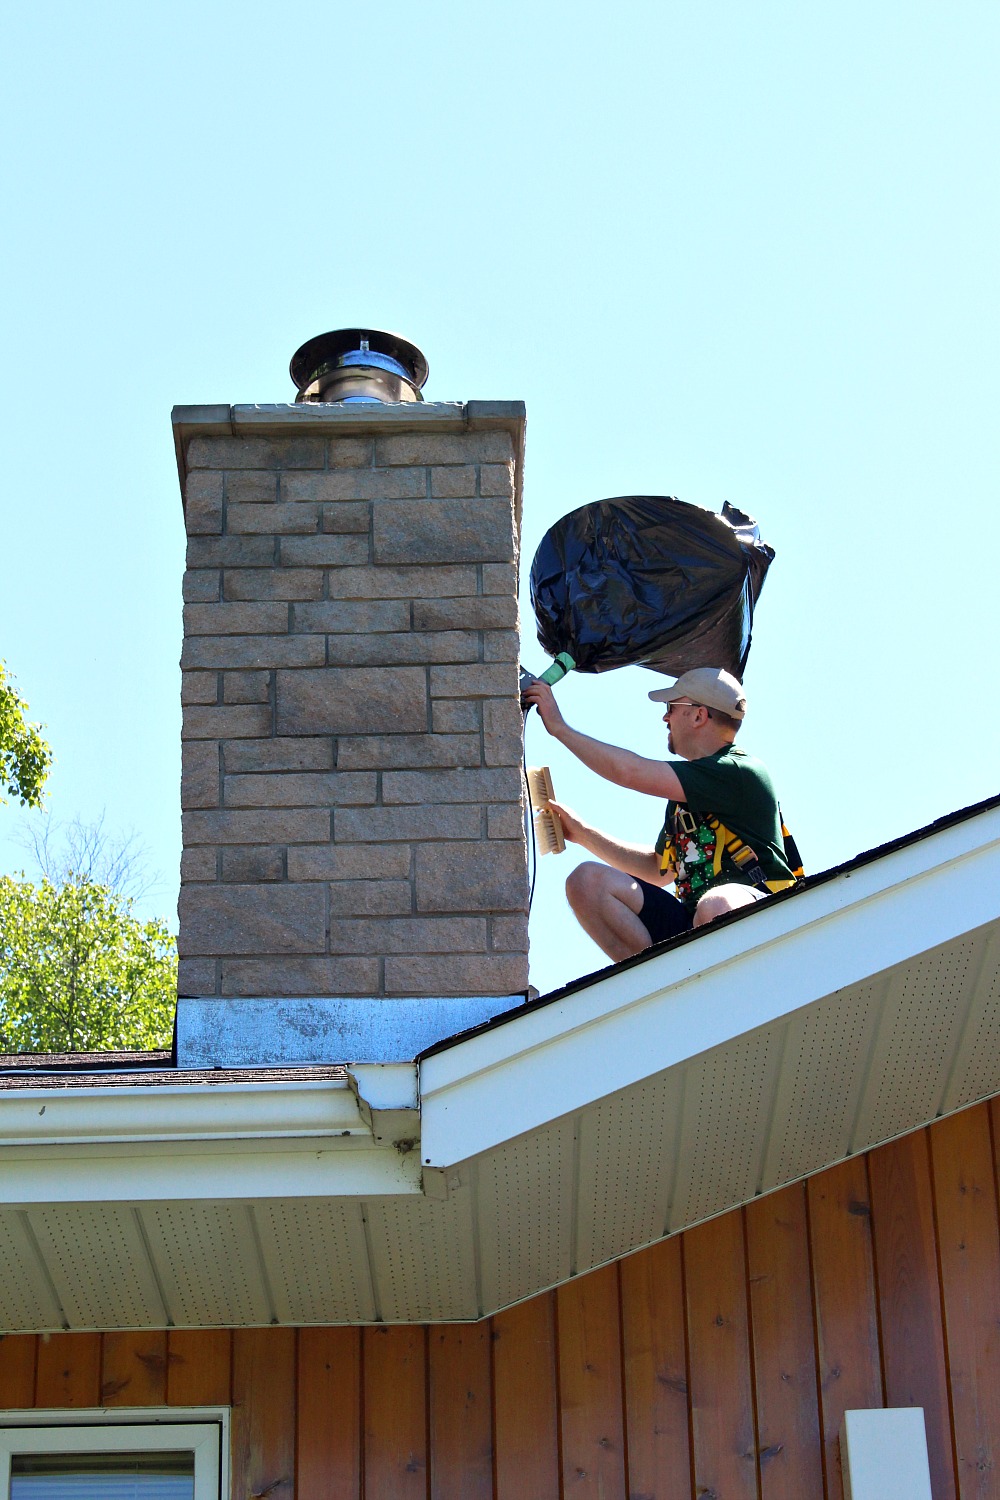 Using Fall Arrest Gear for Painting a Chimney